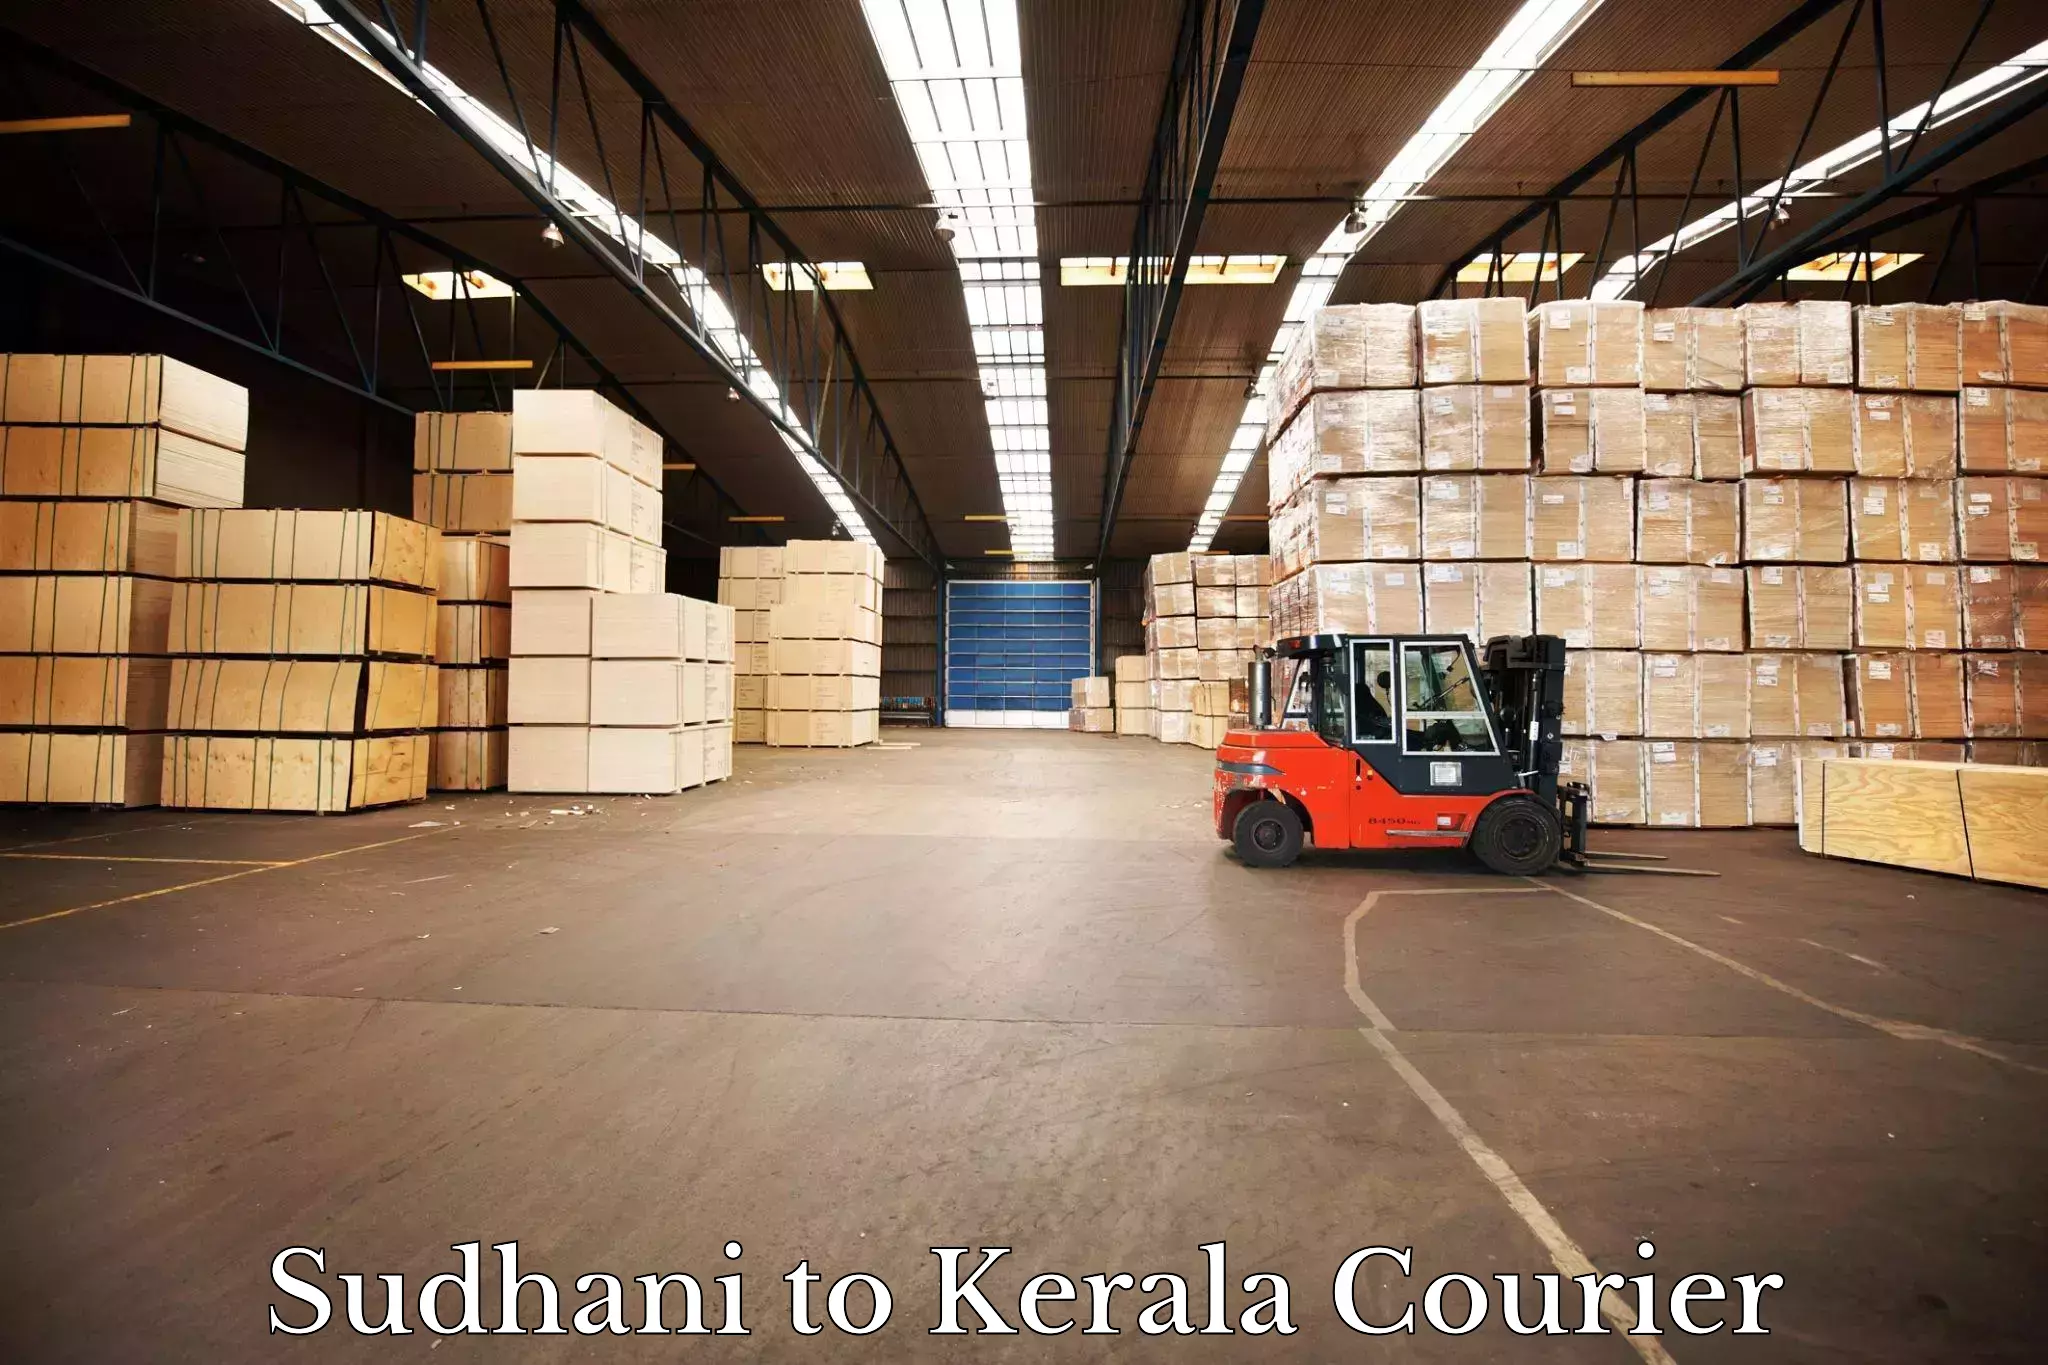 Reliable parcel services Sudhani to Kochi